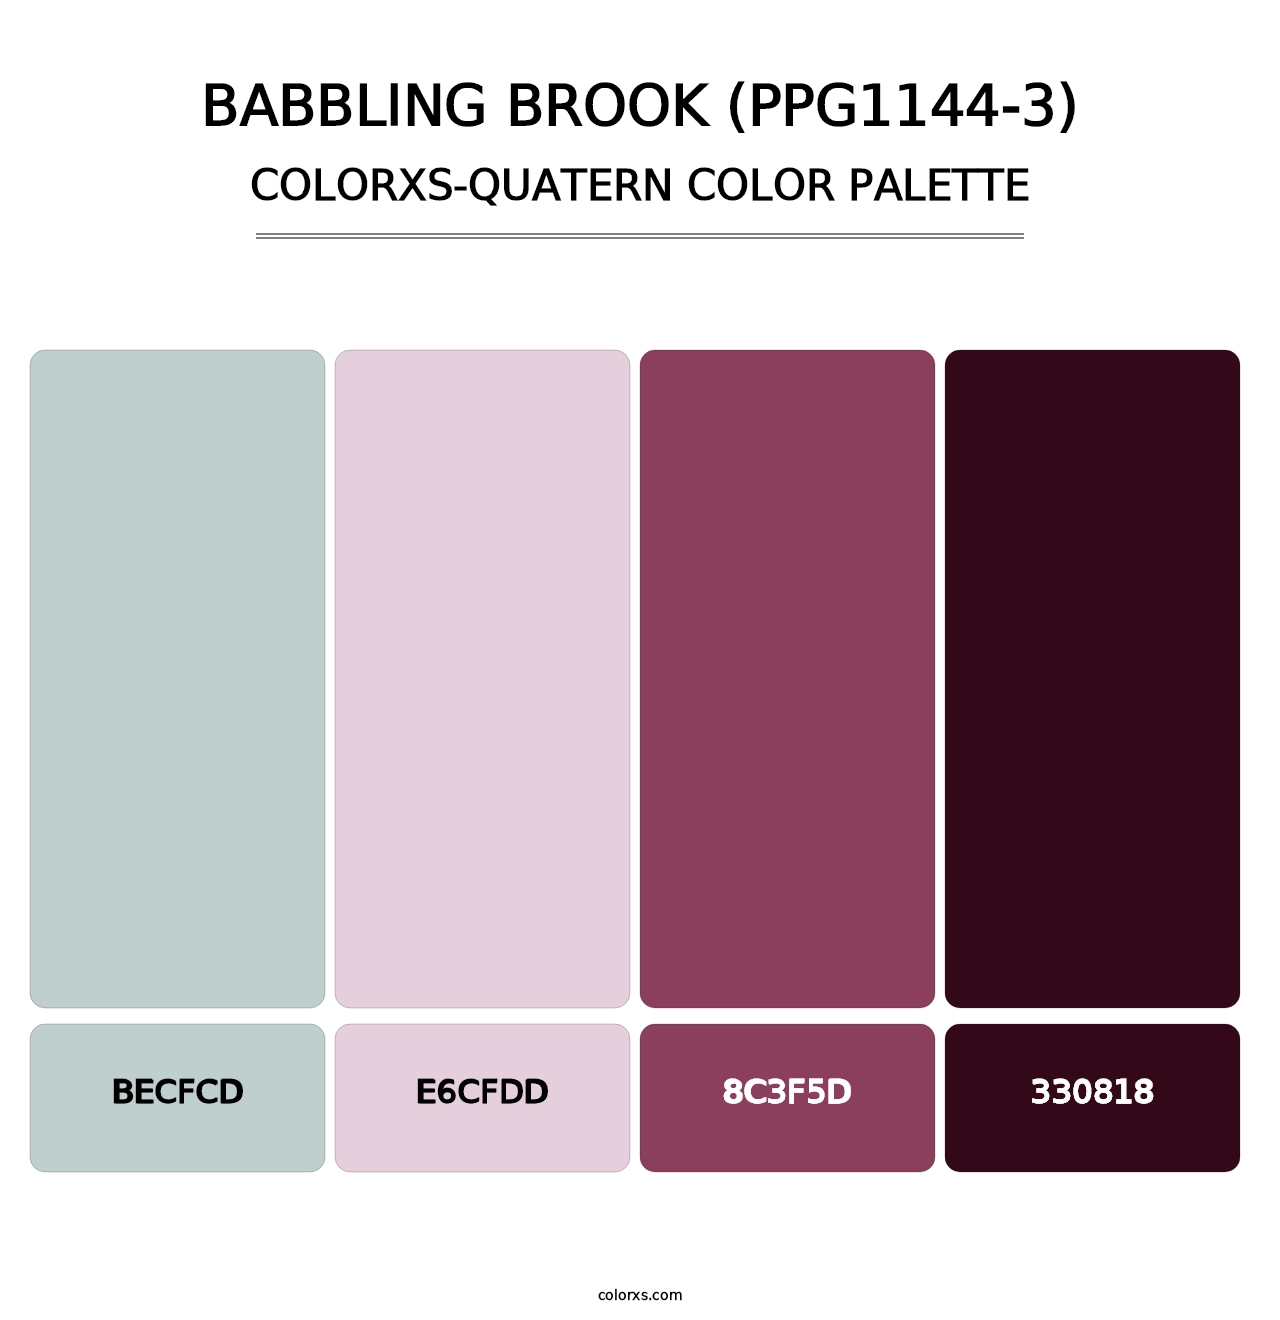 Babbling Brook (PPG1144-3) - Colorxs Quatern Palette